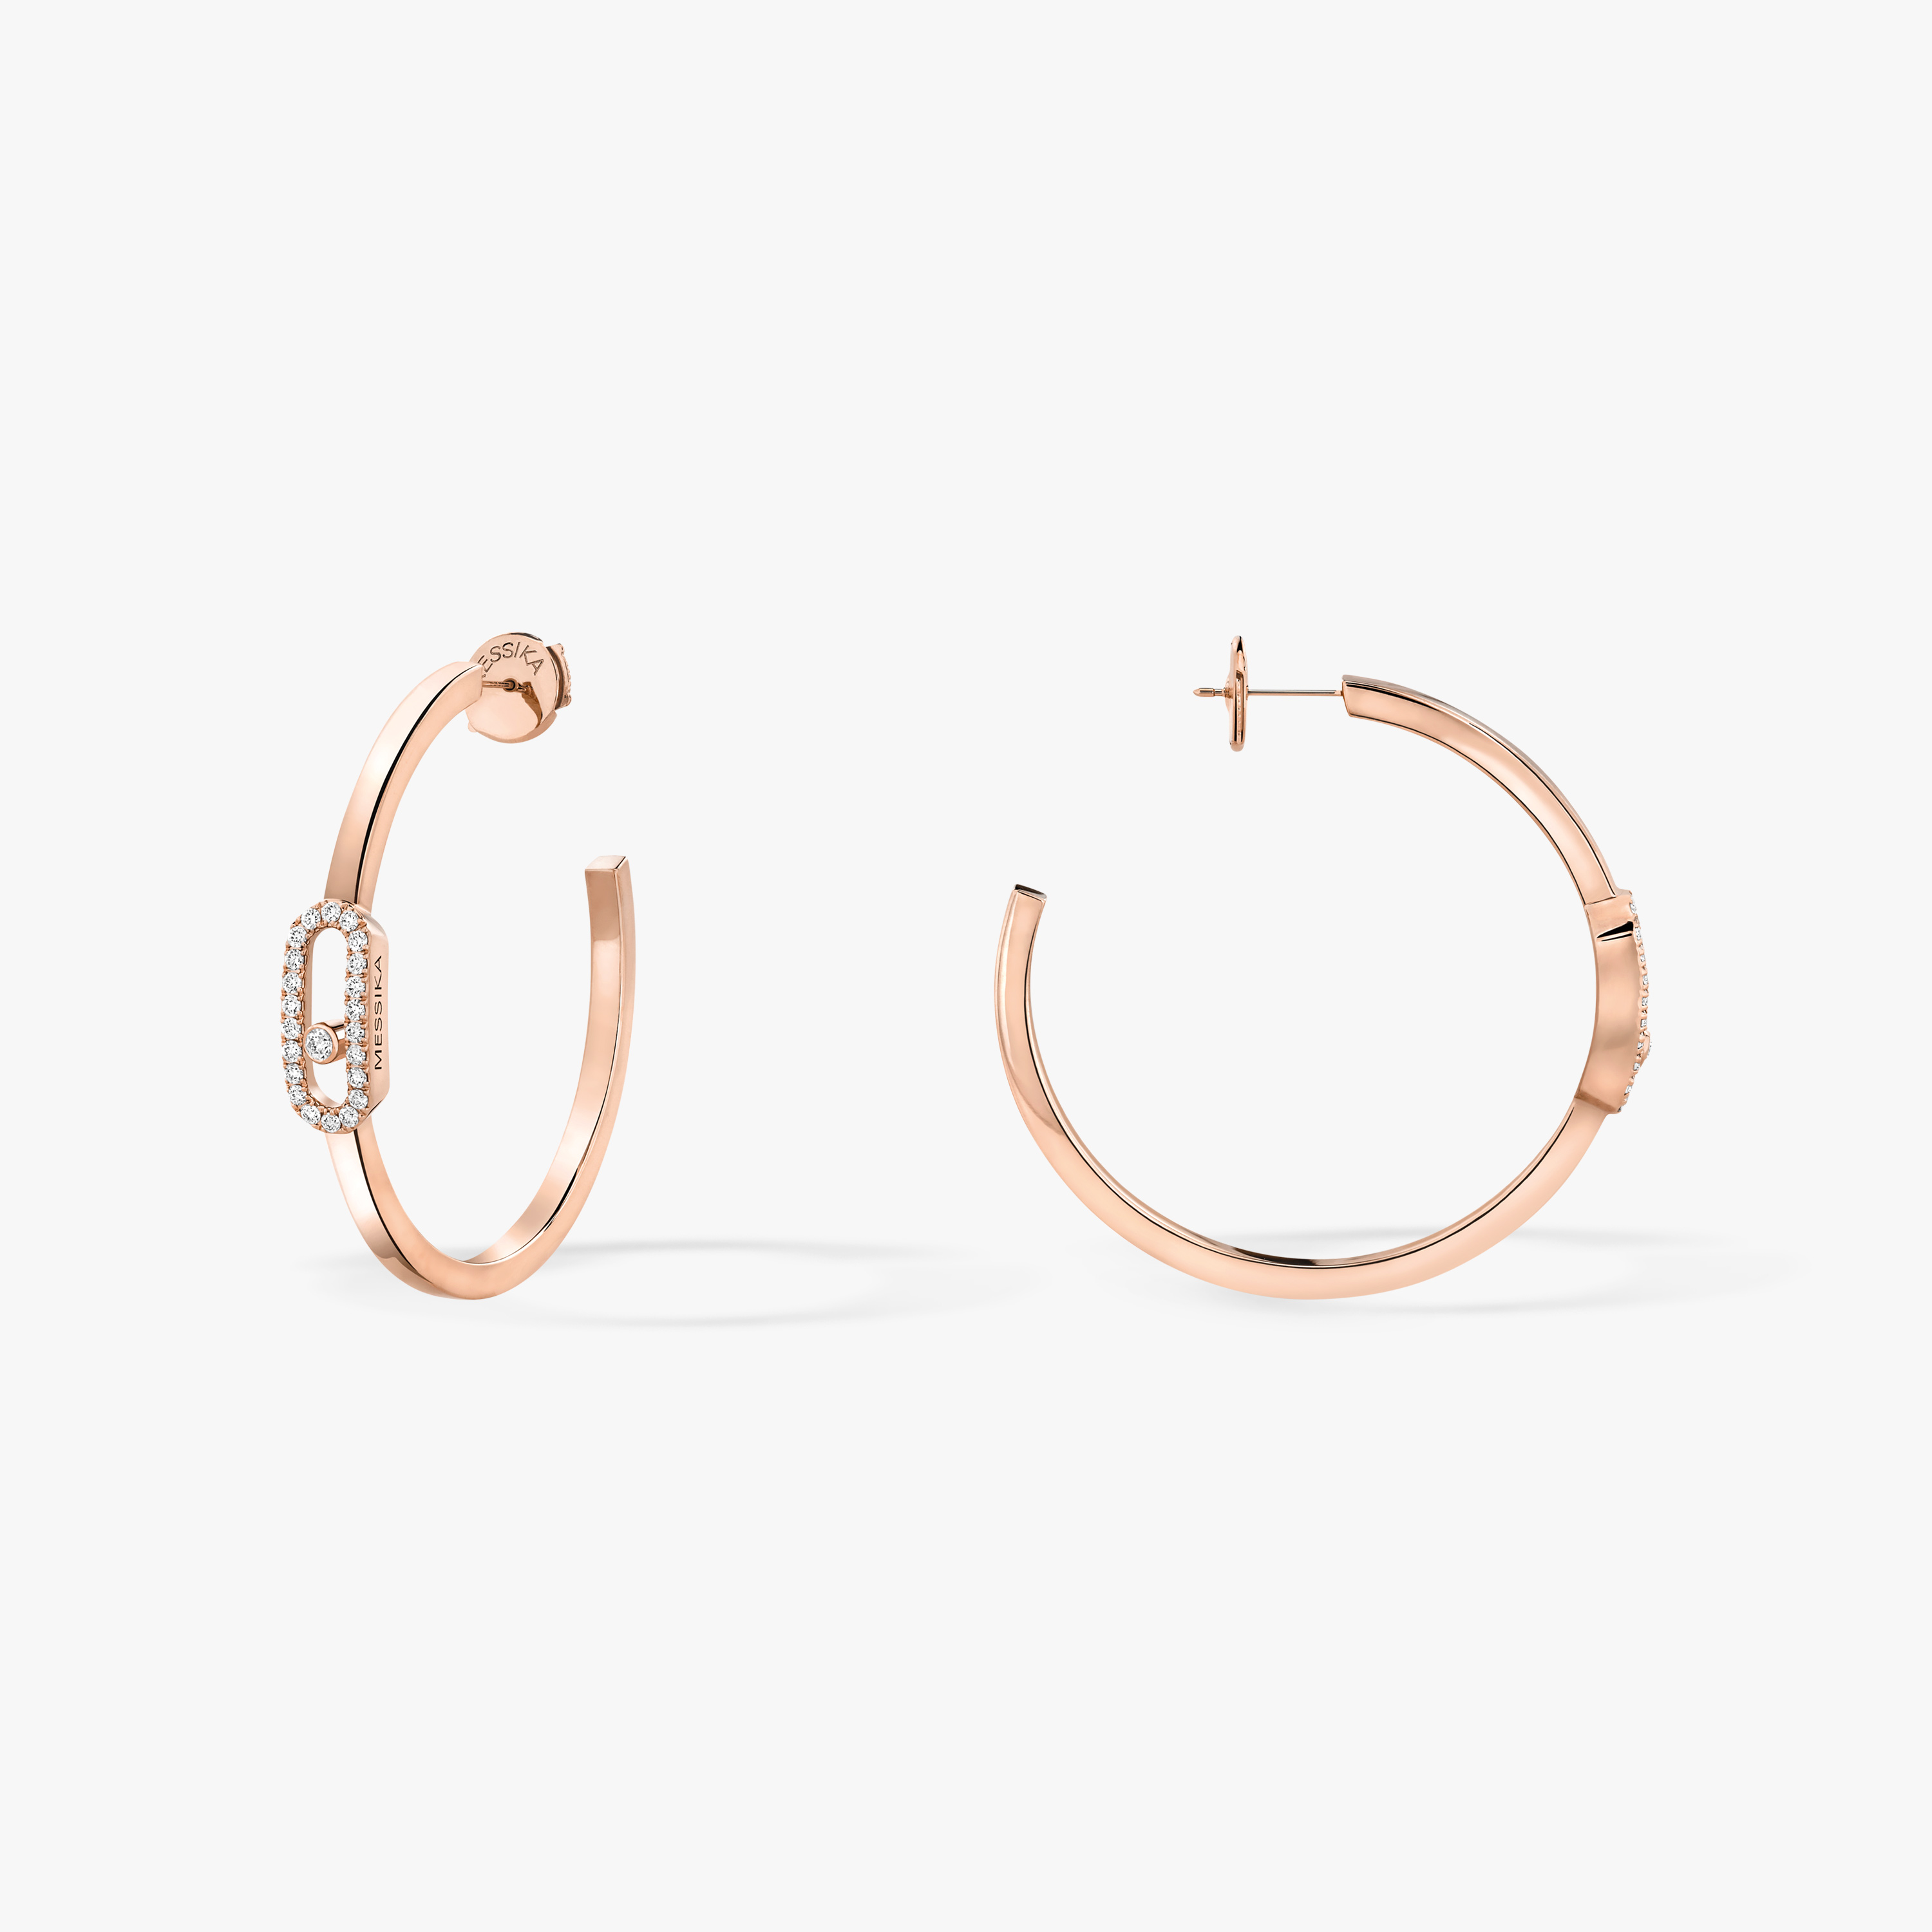 Earrings For Her Pink Gold Diamond Move Uno Small Hoop Earrings 12485-PG